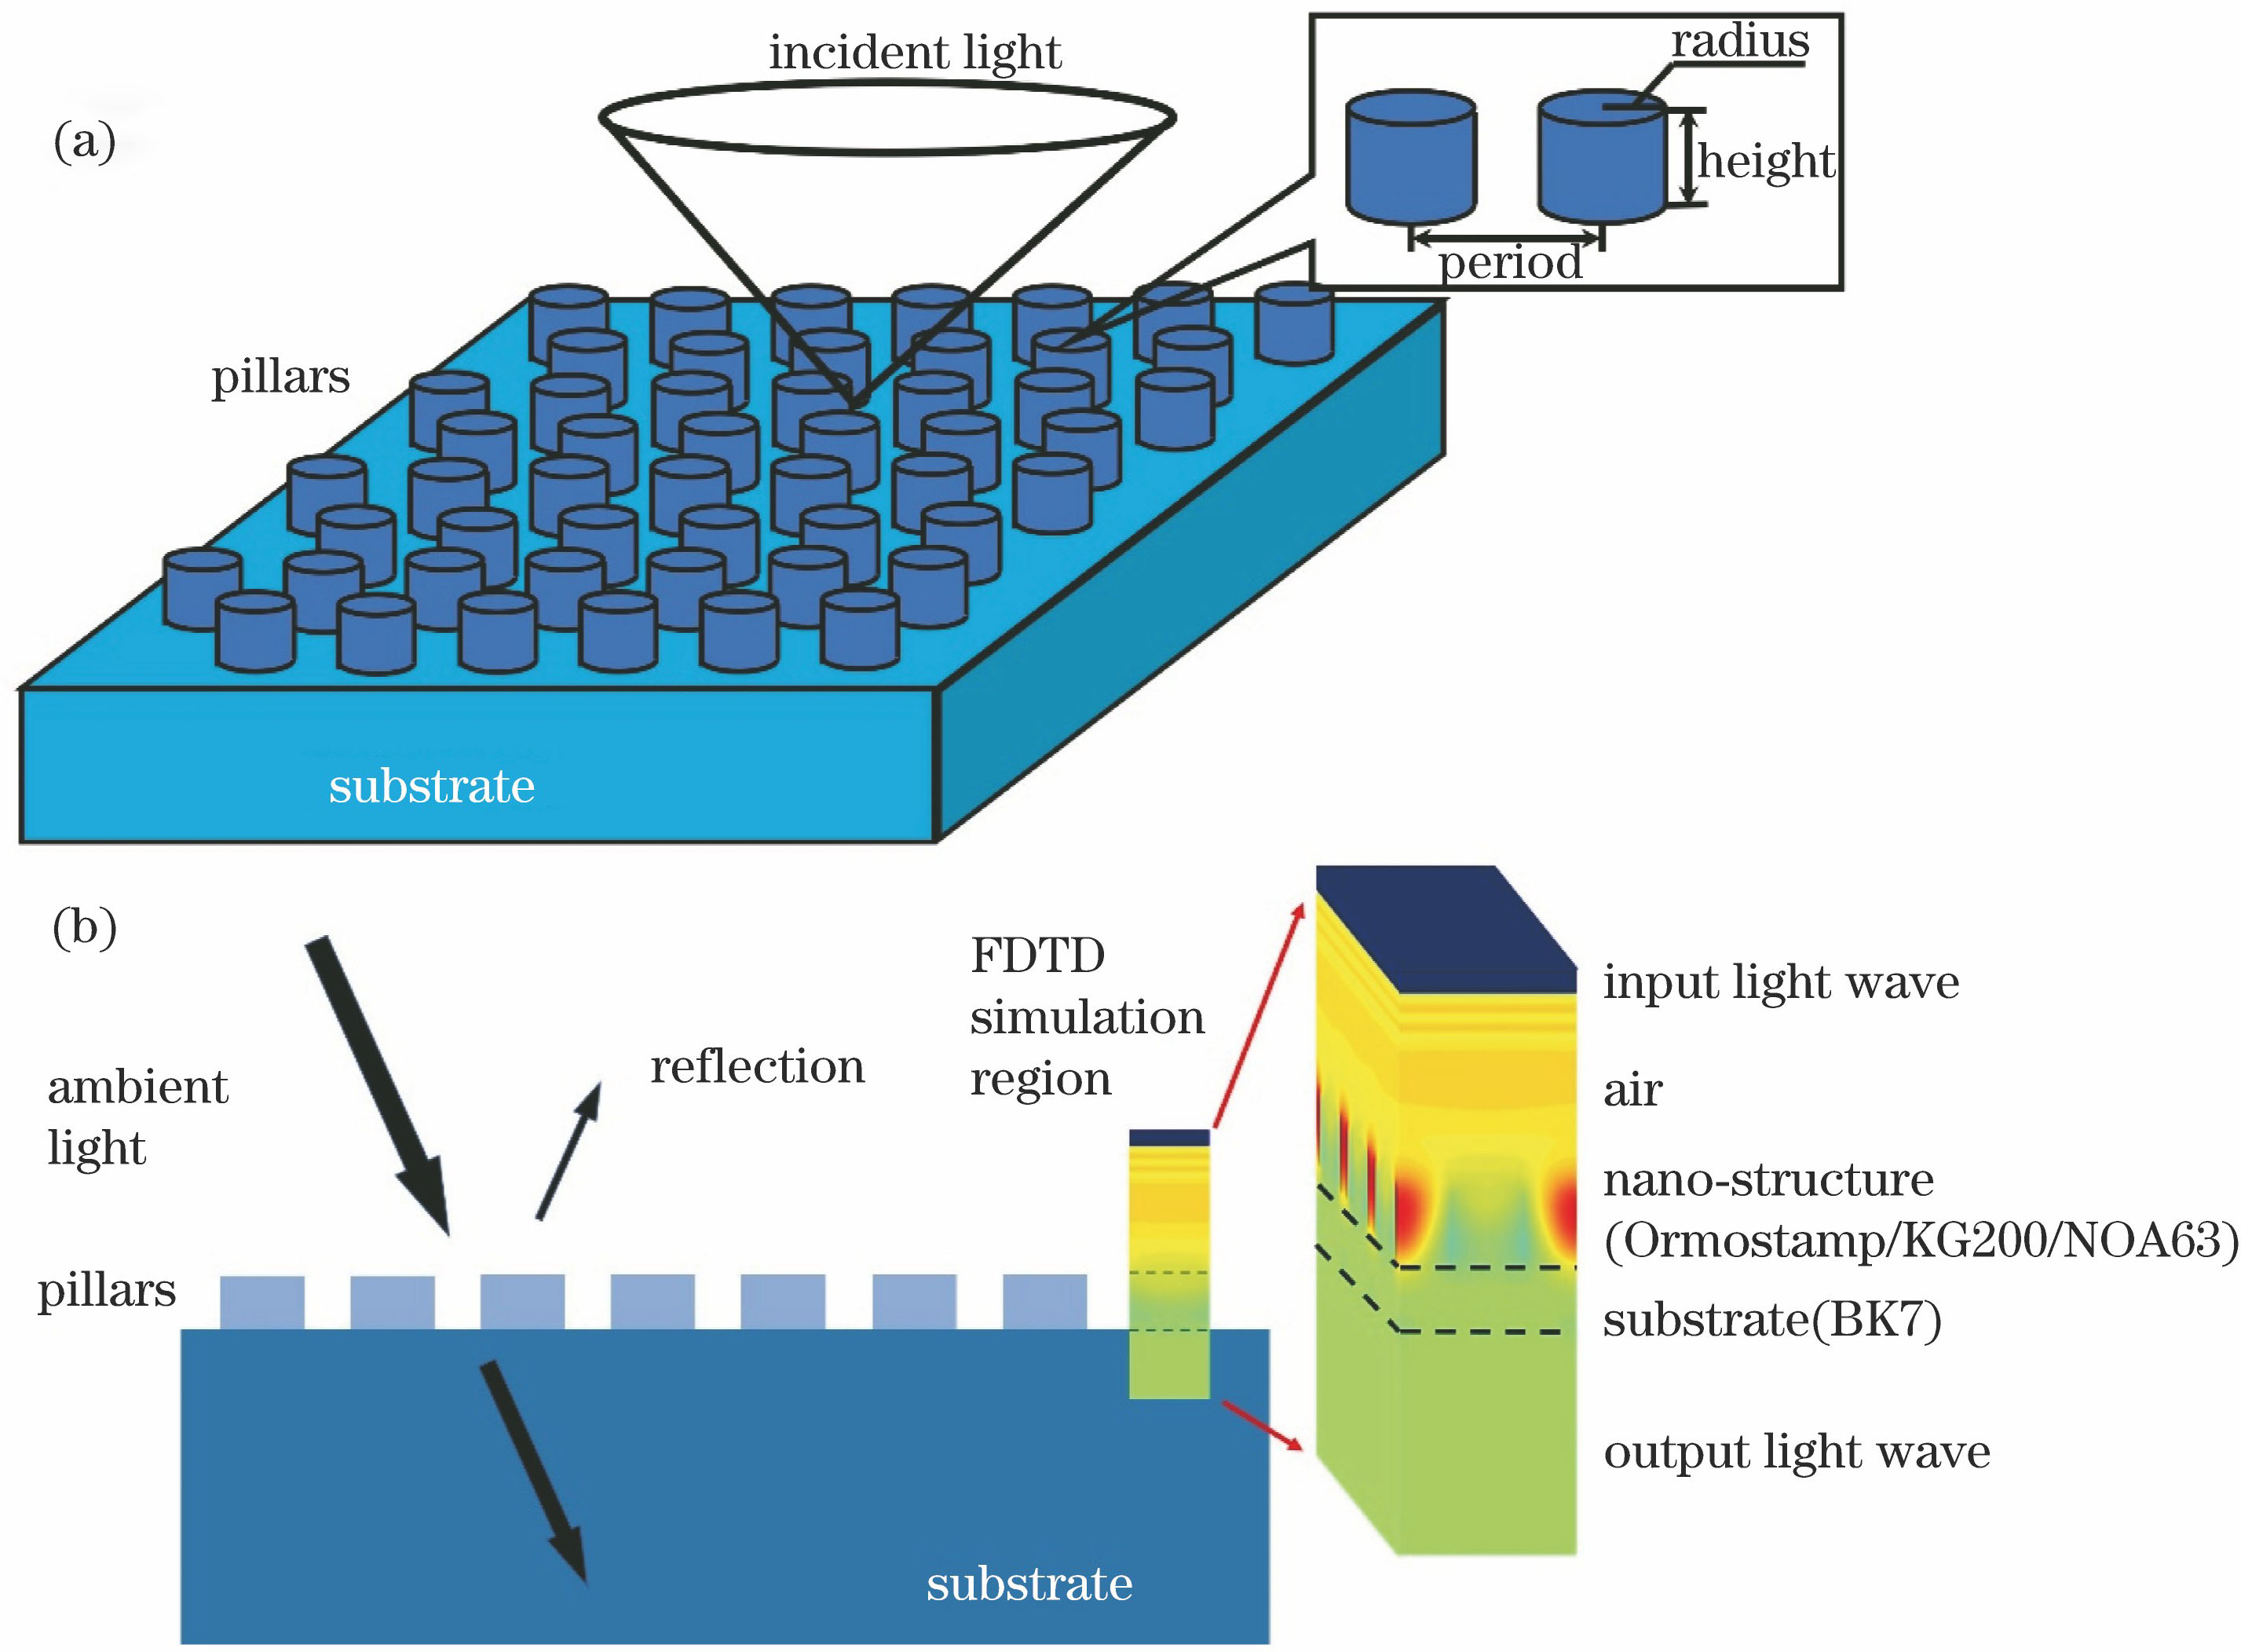 Schematic of antireflection layer. (a) Distribution of the nanopillars of antireflection layer; (b) antireflection layer in FDTD simulation (material of nano-structure is UV curable optical resin, material of substrate is optical glass)